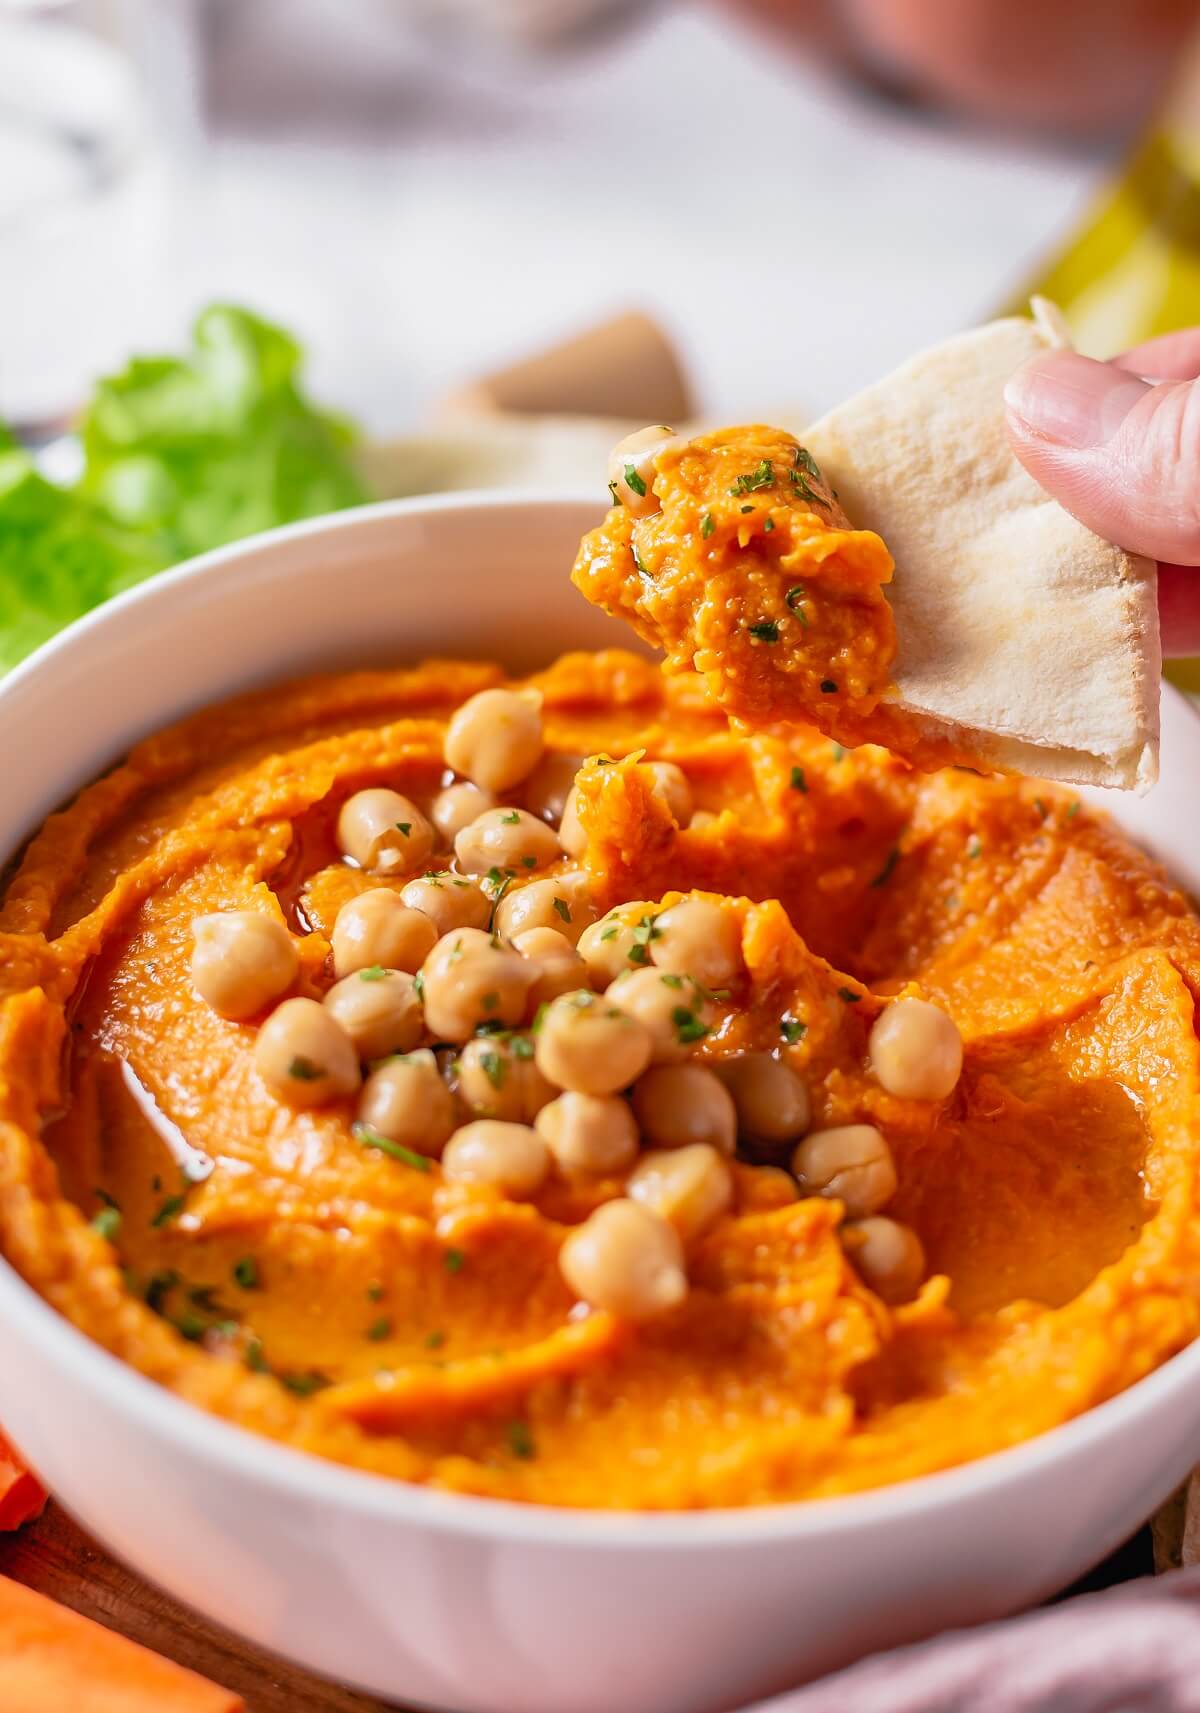 A hand holds a triangle of pita bread topped with pumpkin hummus over a bowl of the same.